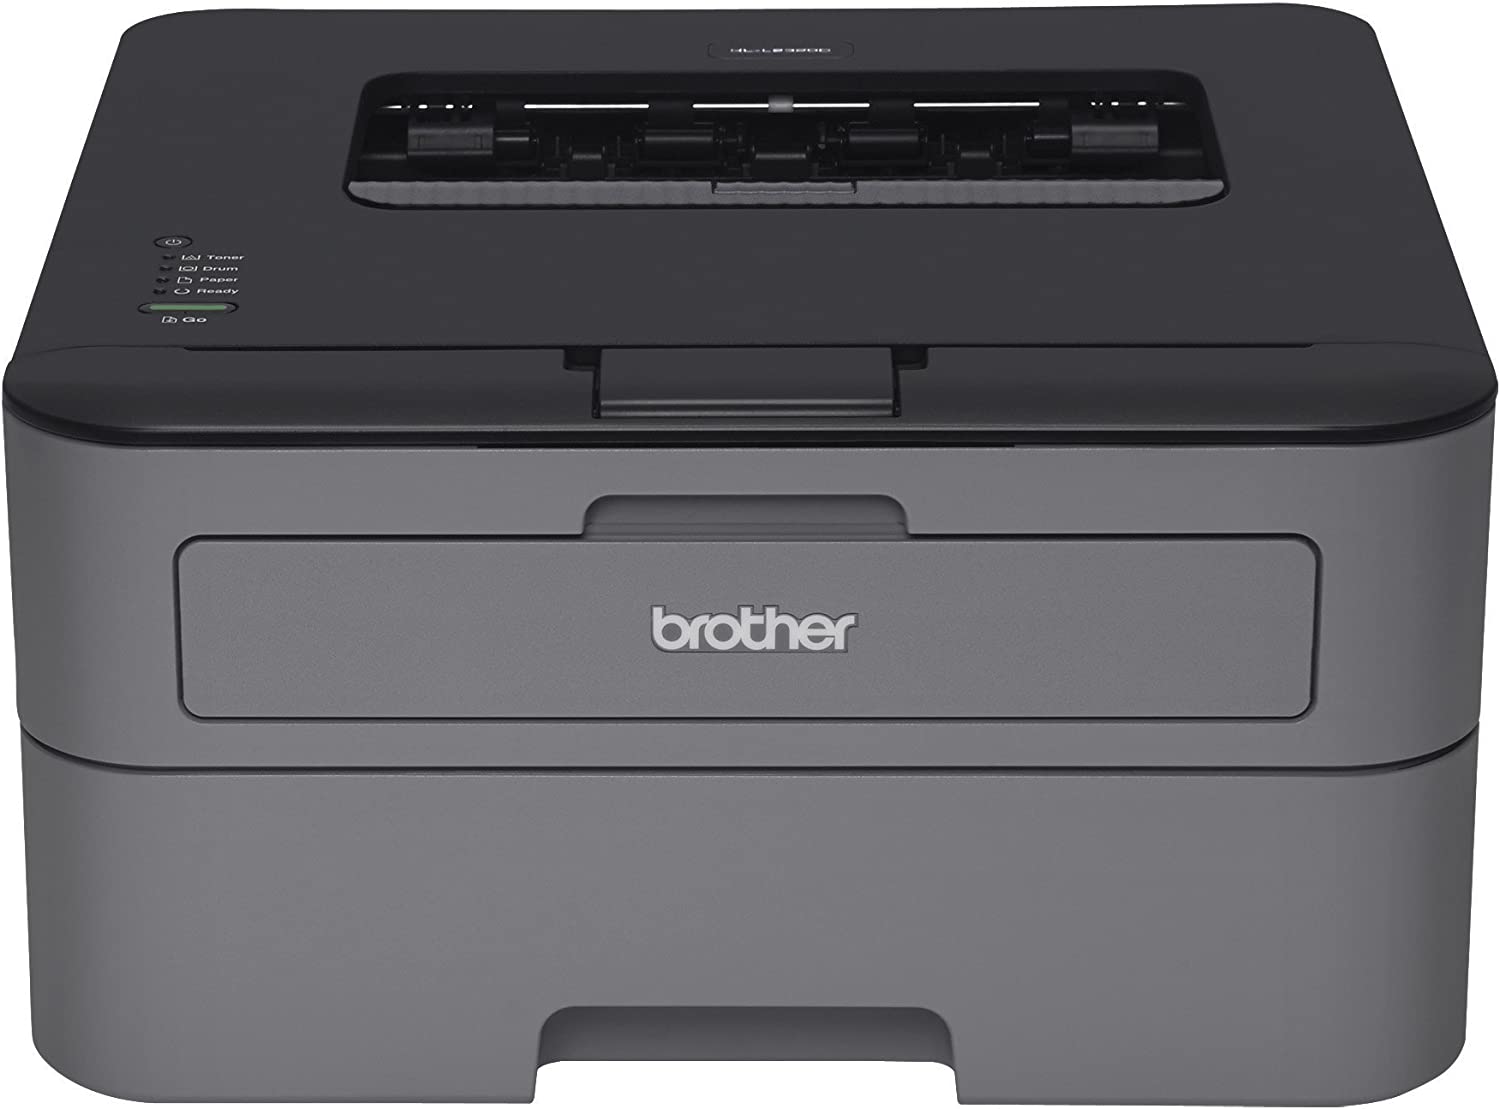 According to Amazon shoppers, these are the 10 best-selling printers for home offices and college dorms